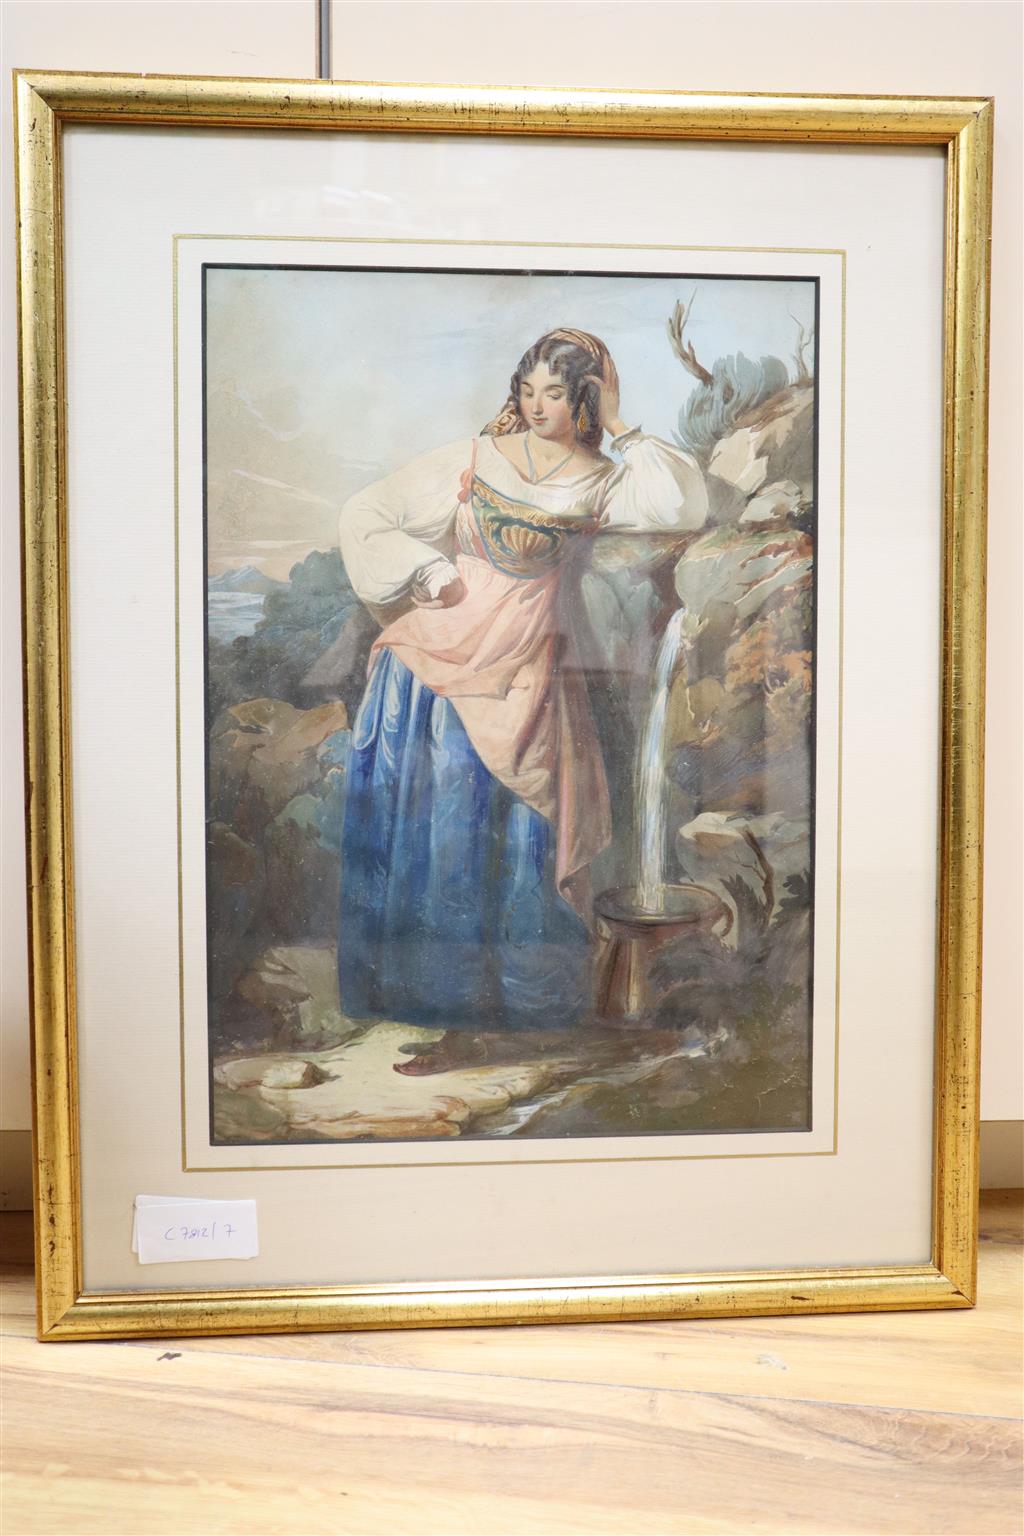 Mid 19th century English School, gouache and watercolour, Study of an Italian peasant girl beside a spring, 37 x 26cm